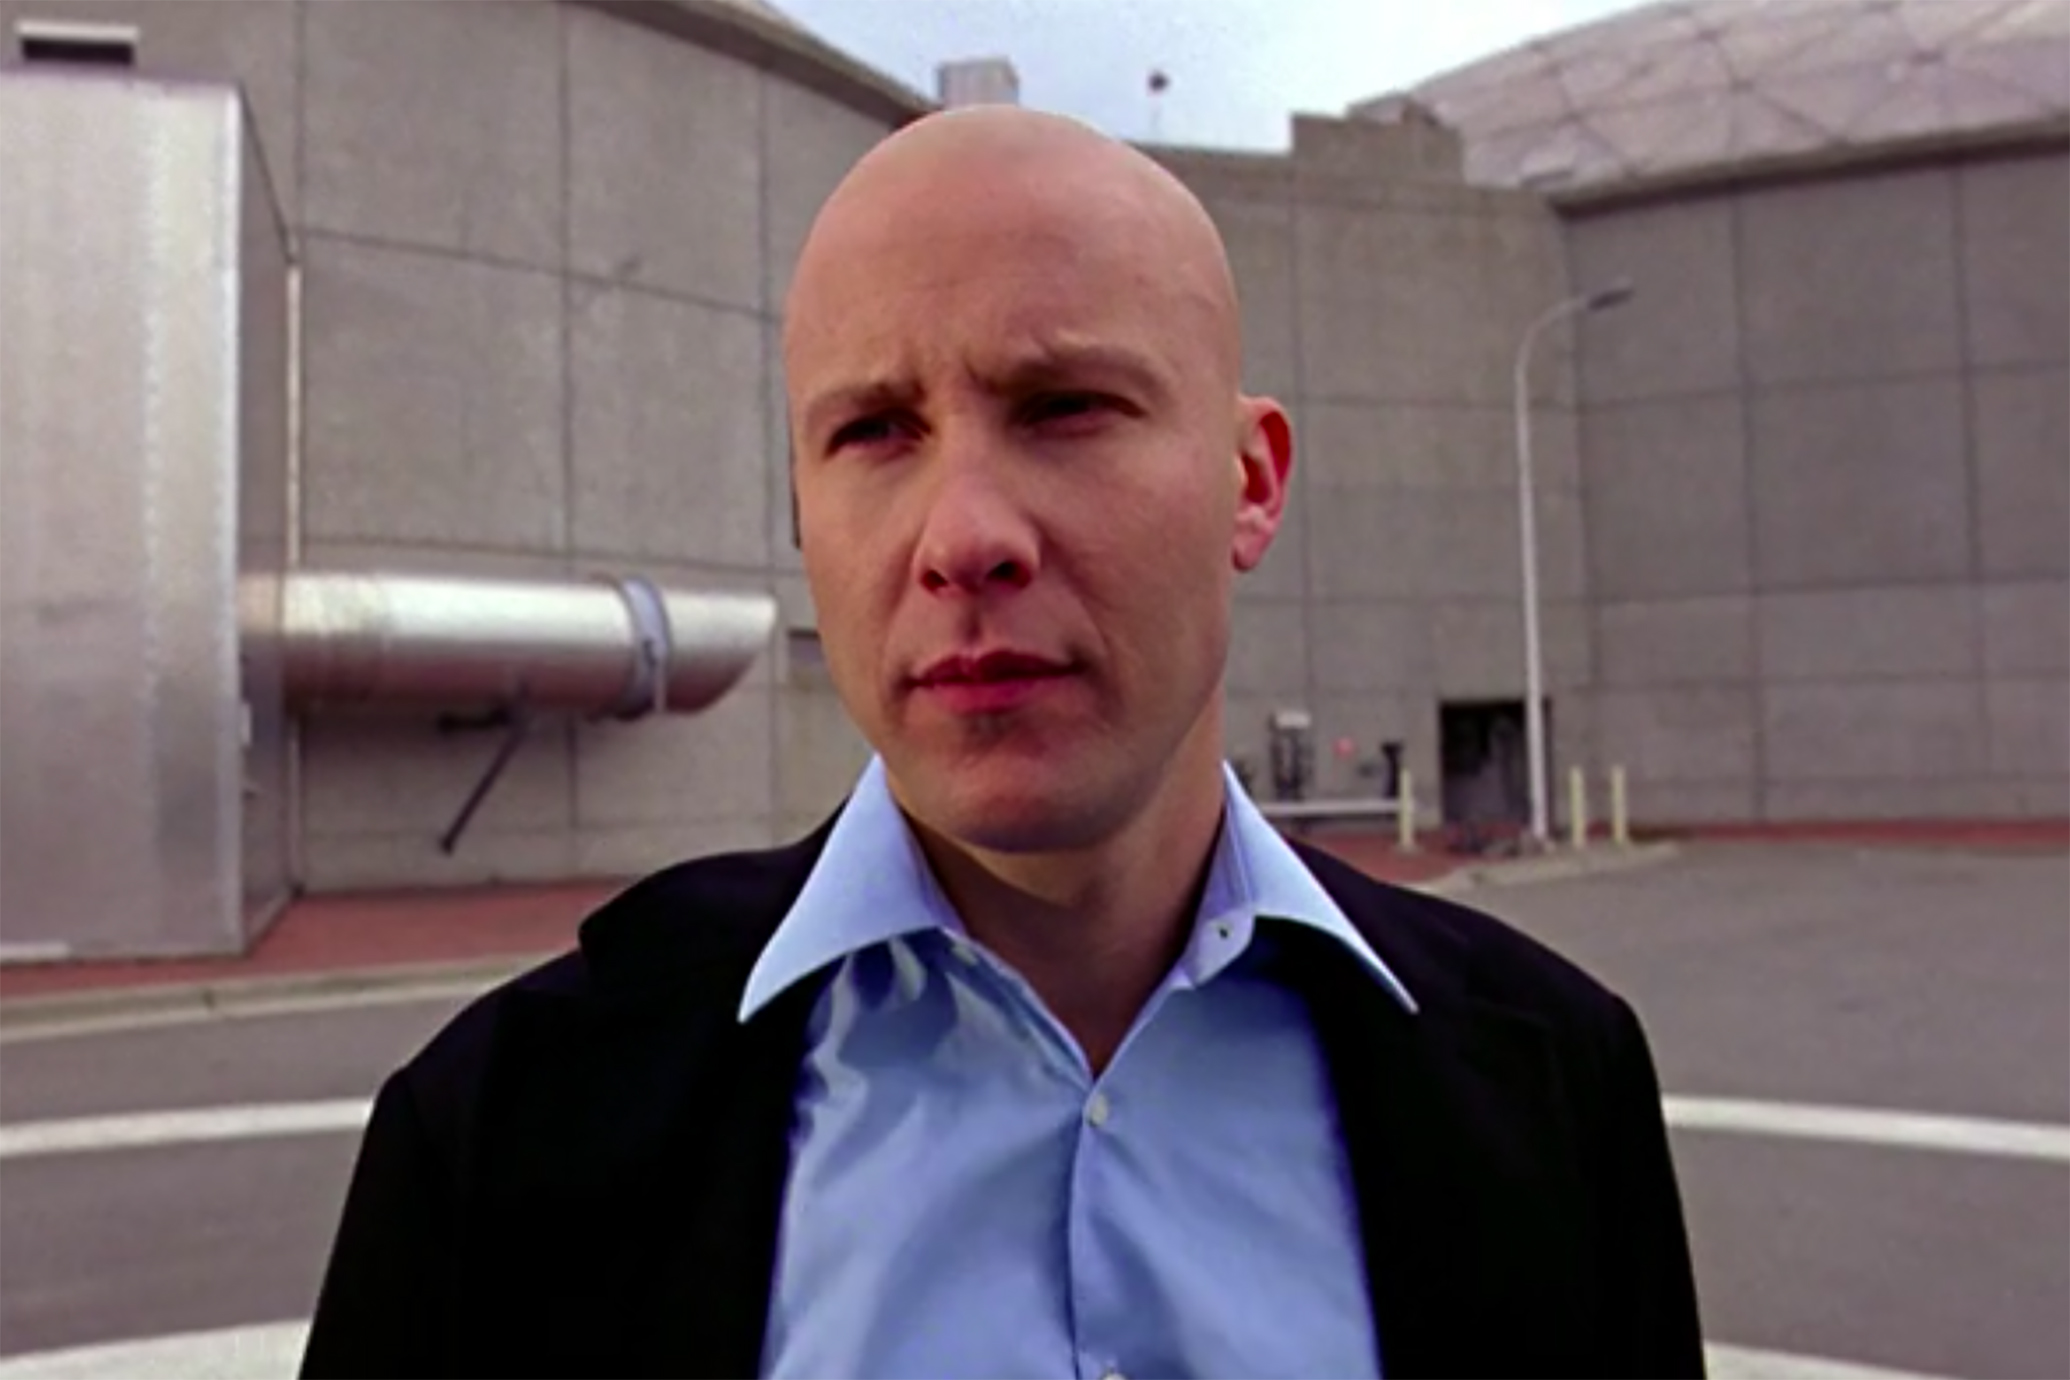 Smallville S Lex Luthor Won T Appear In Arrowverse Crossover Says Michael Rosenbaum Tv Guide